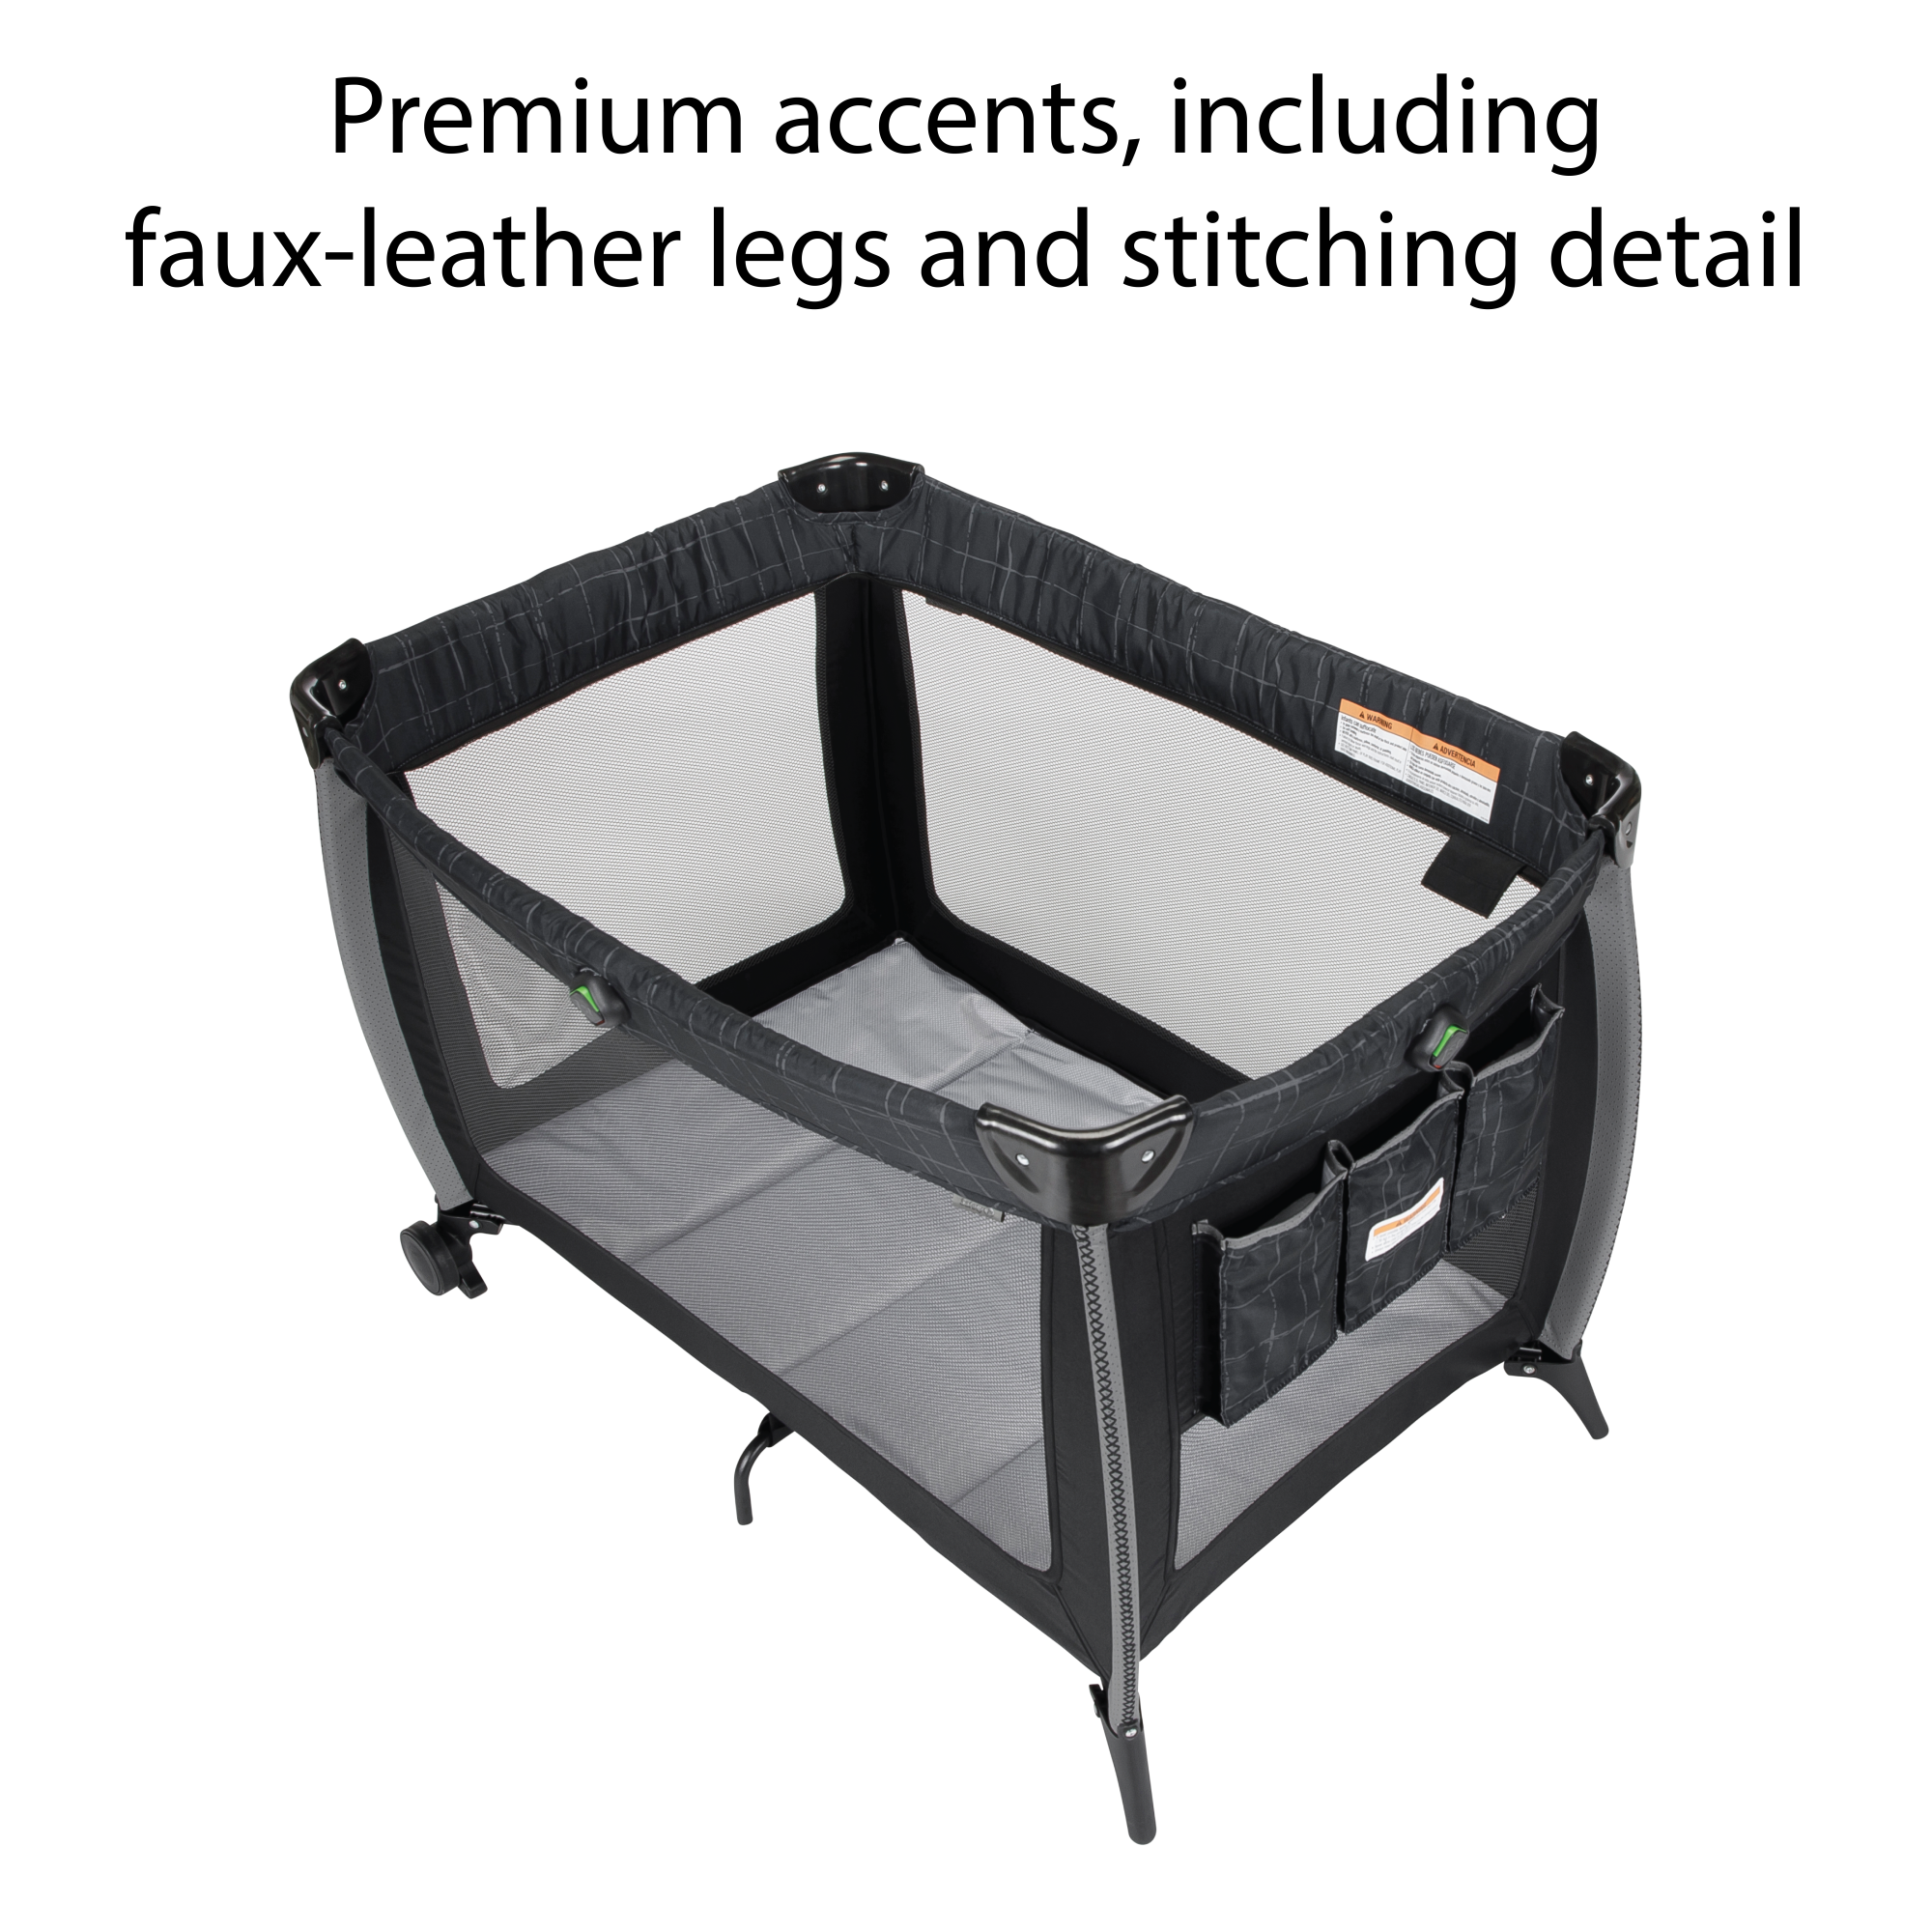 Play-and-Stay Play Yard - premium accents, including faux-leather legs and stitching detail